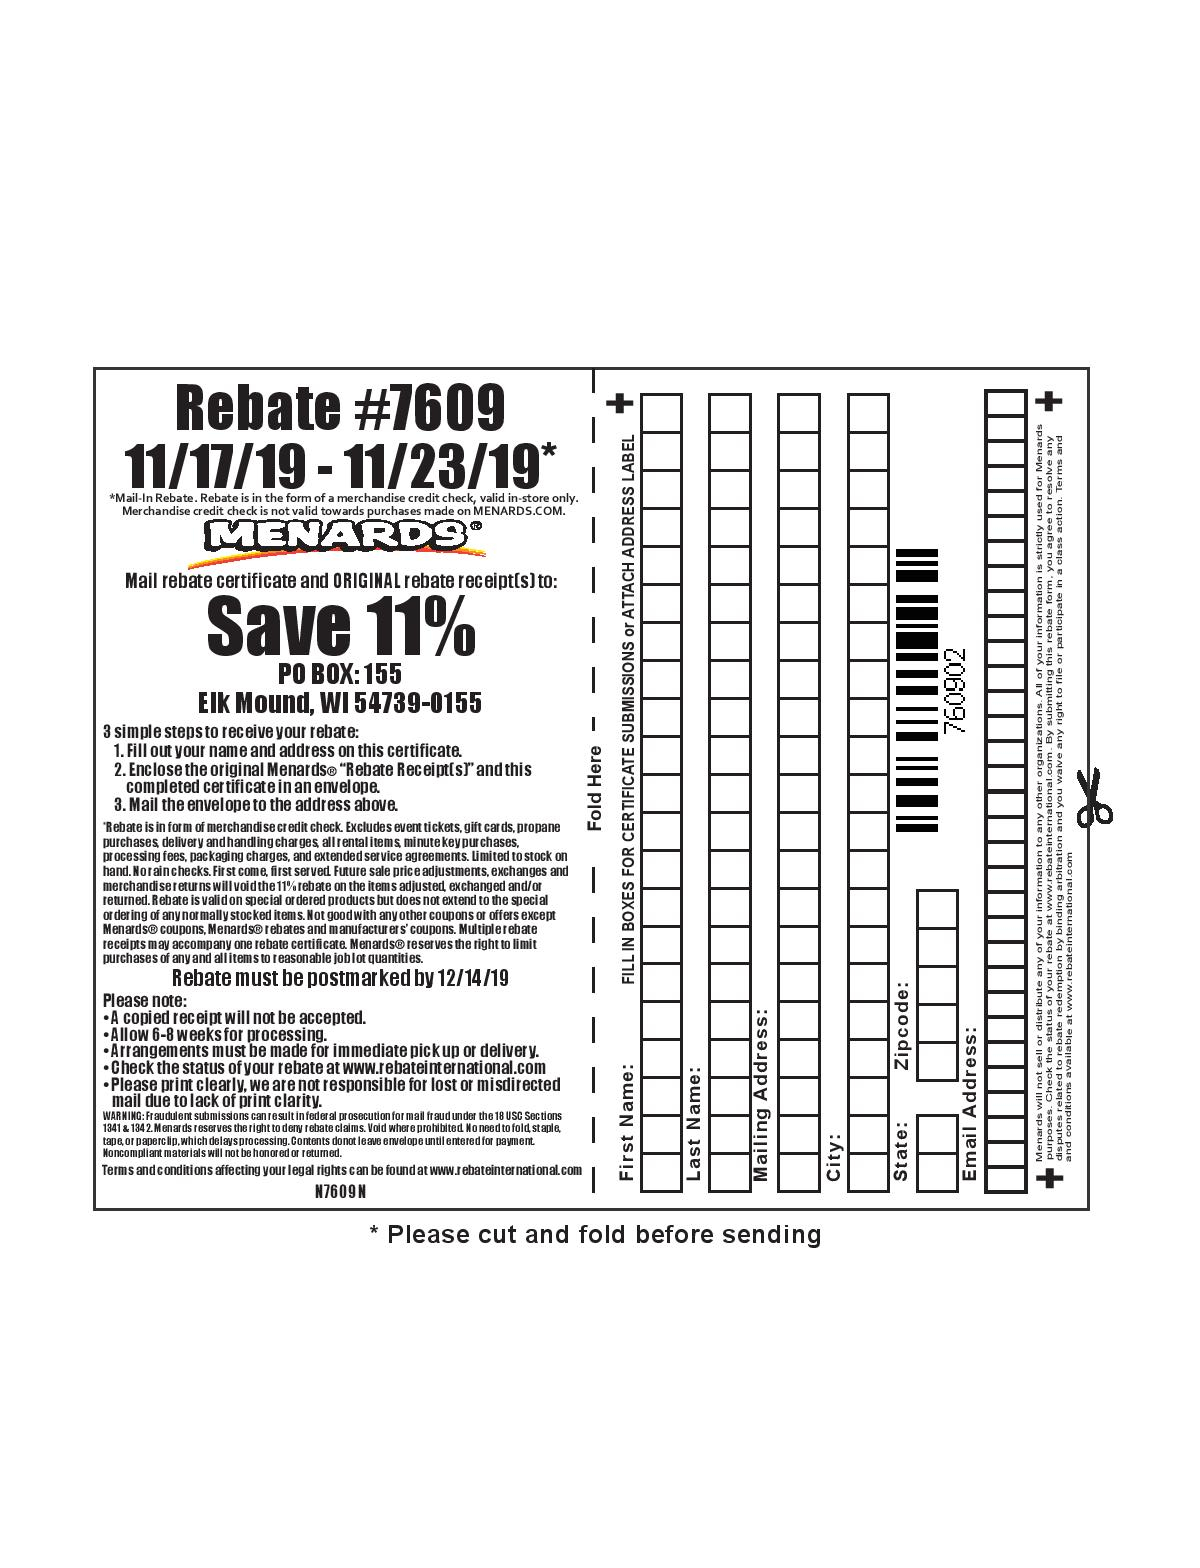 How Often Does Menards Have An 11 Rebate